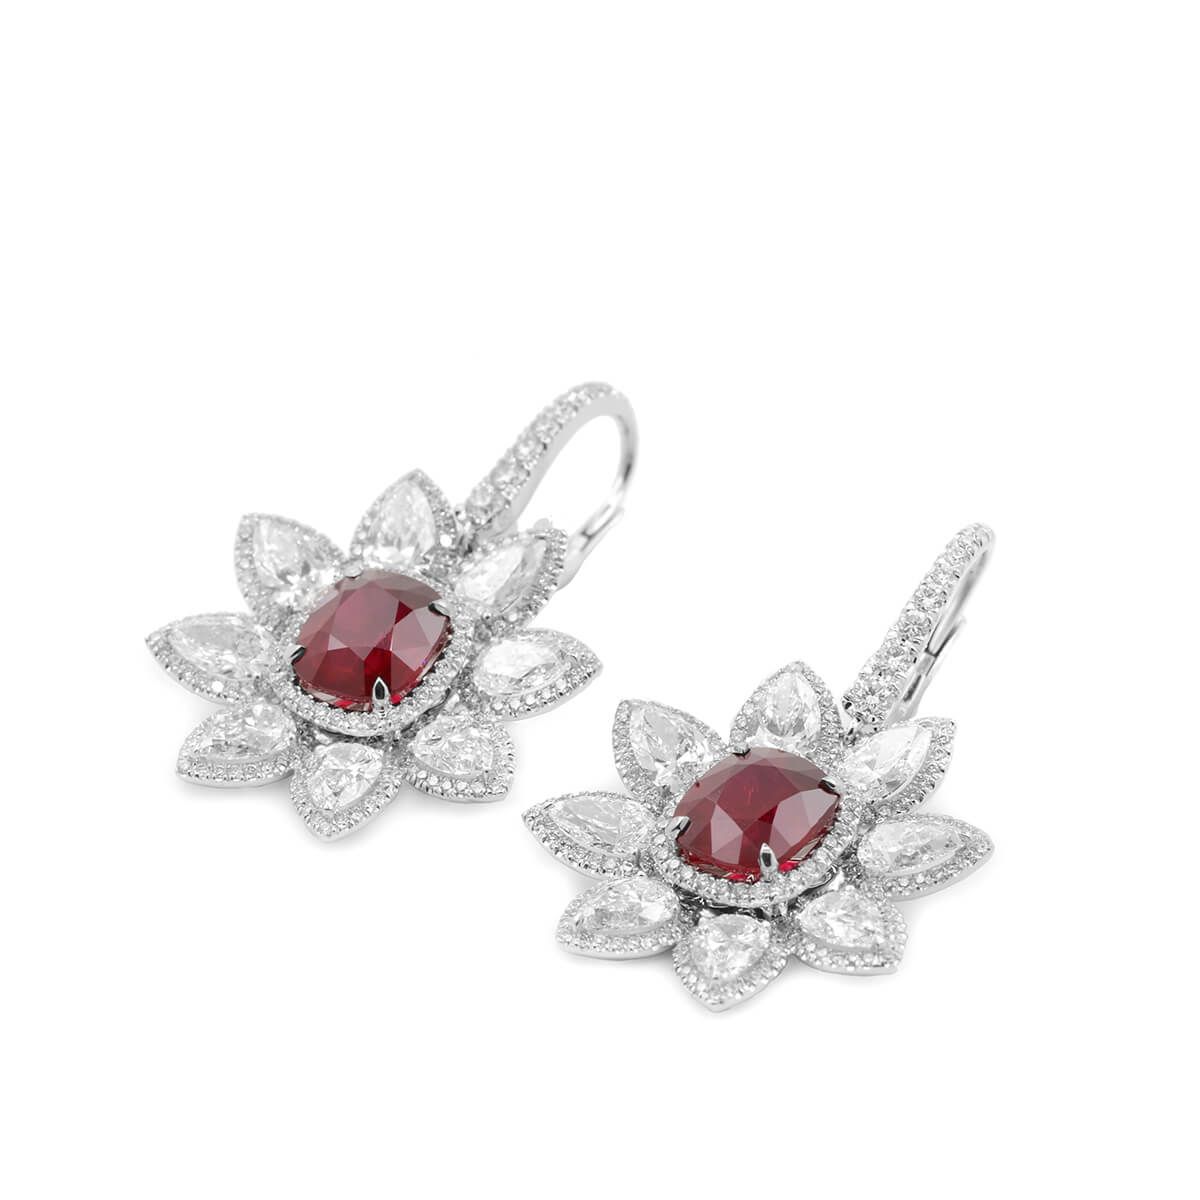 Natural Vivid Red Mozambique Ruby Earrings, 14.96 Ct. TW, GRS Certified, JCEG01065534, Unheated